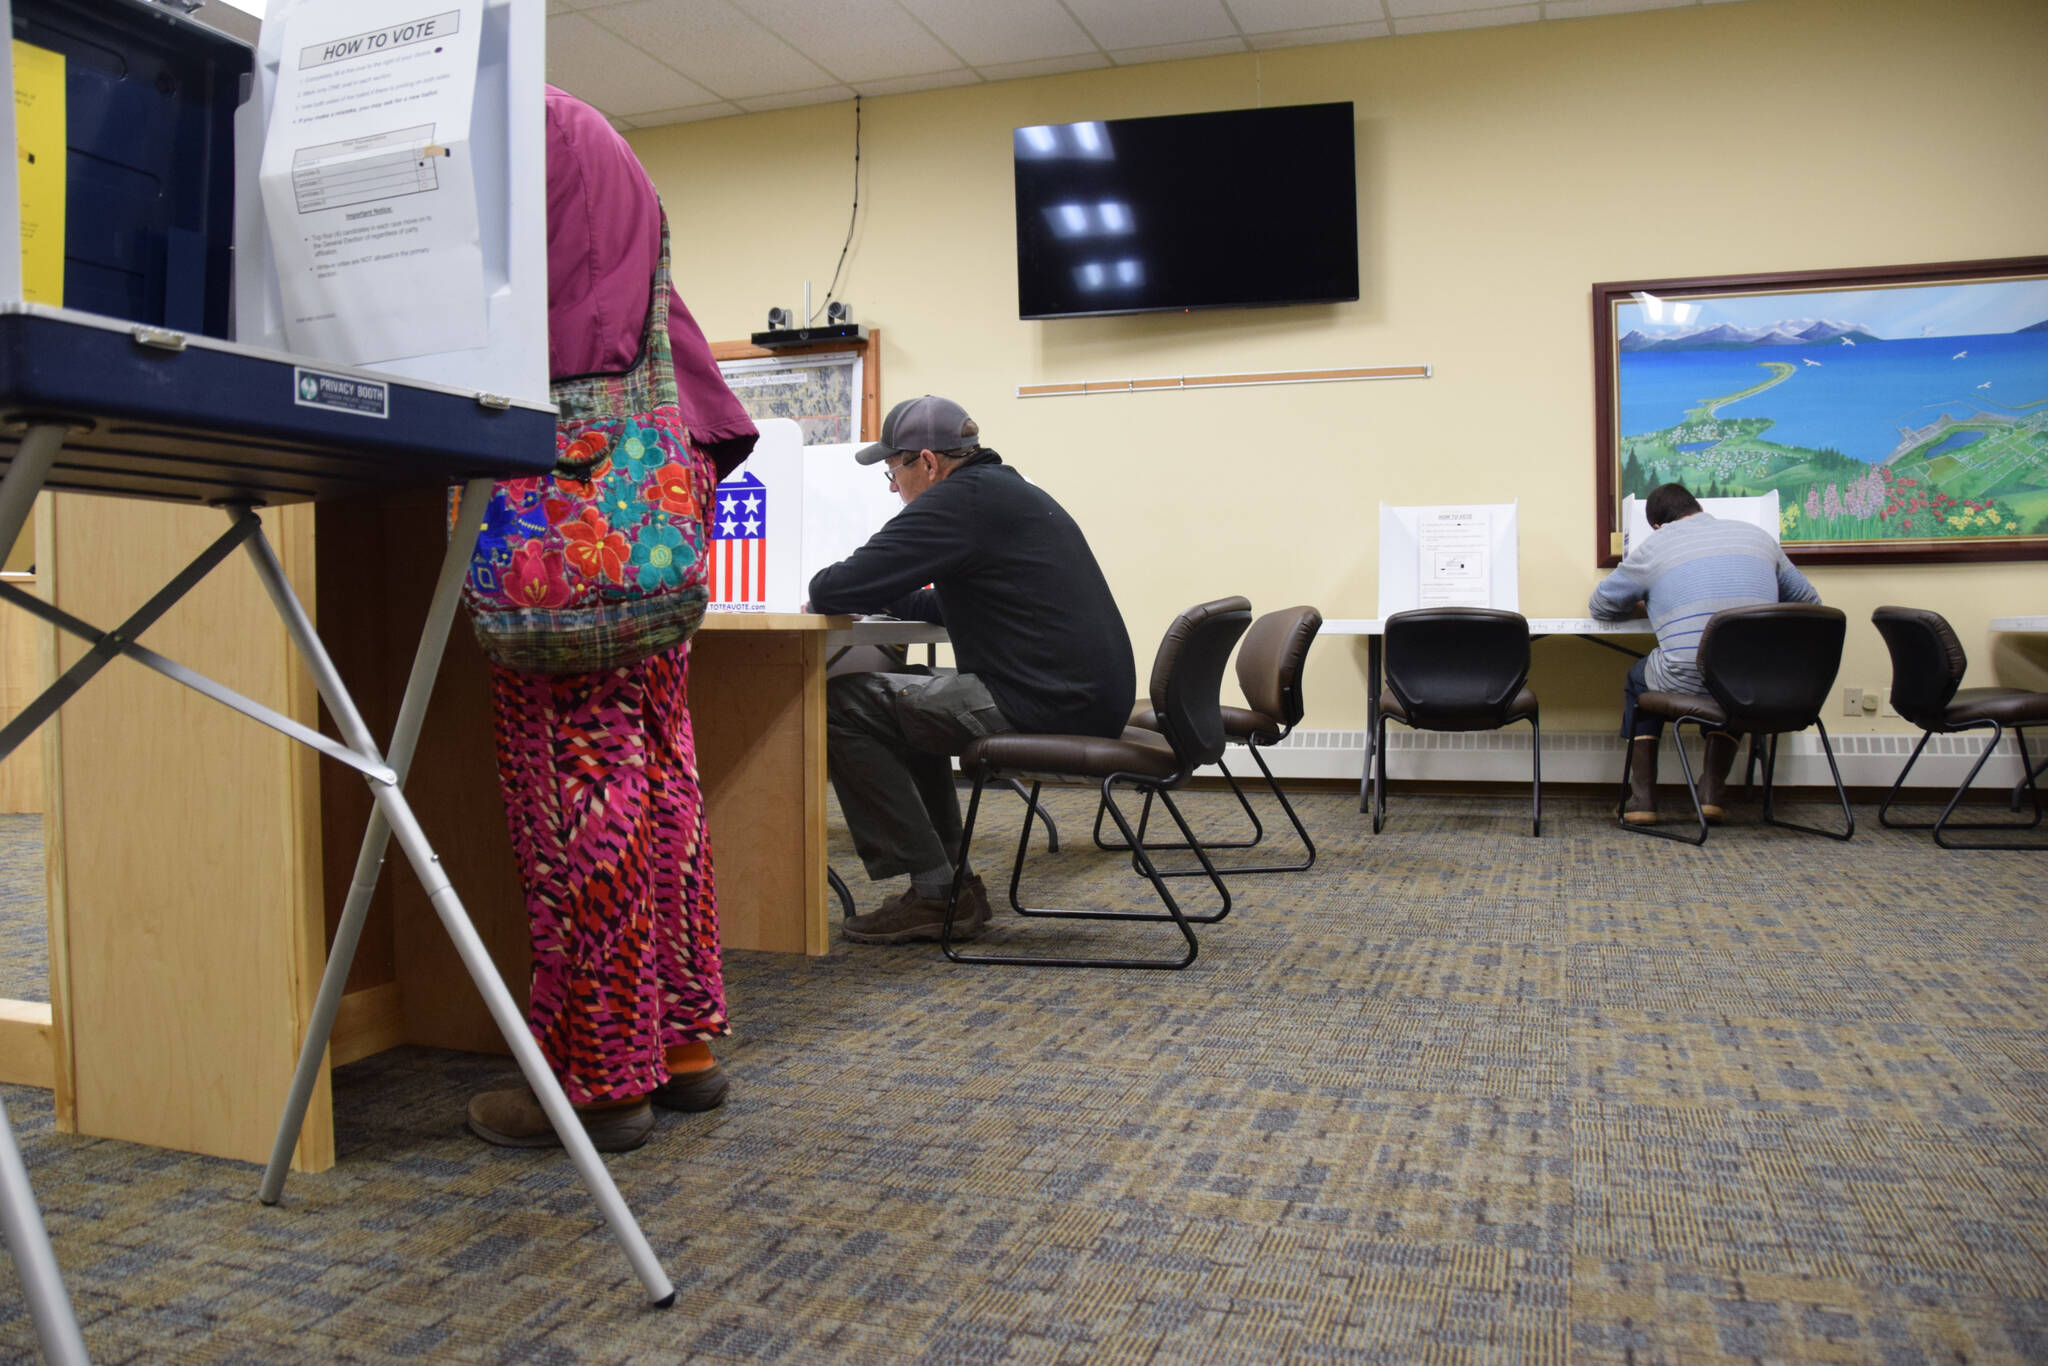 Voters for Kenai Peninsula Borough and City of Homer elections at Cowles Council Chambers on Tuesday, Oct. 4, 2022 in Homer, Alaska. (Photo by Charlie Menke/ Homer News)